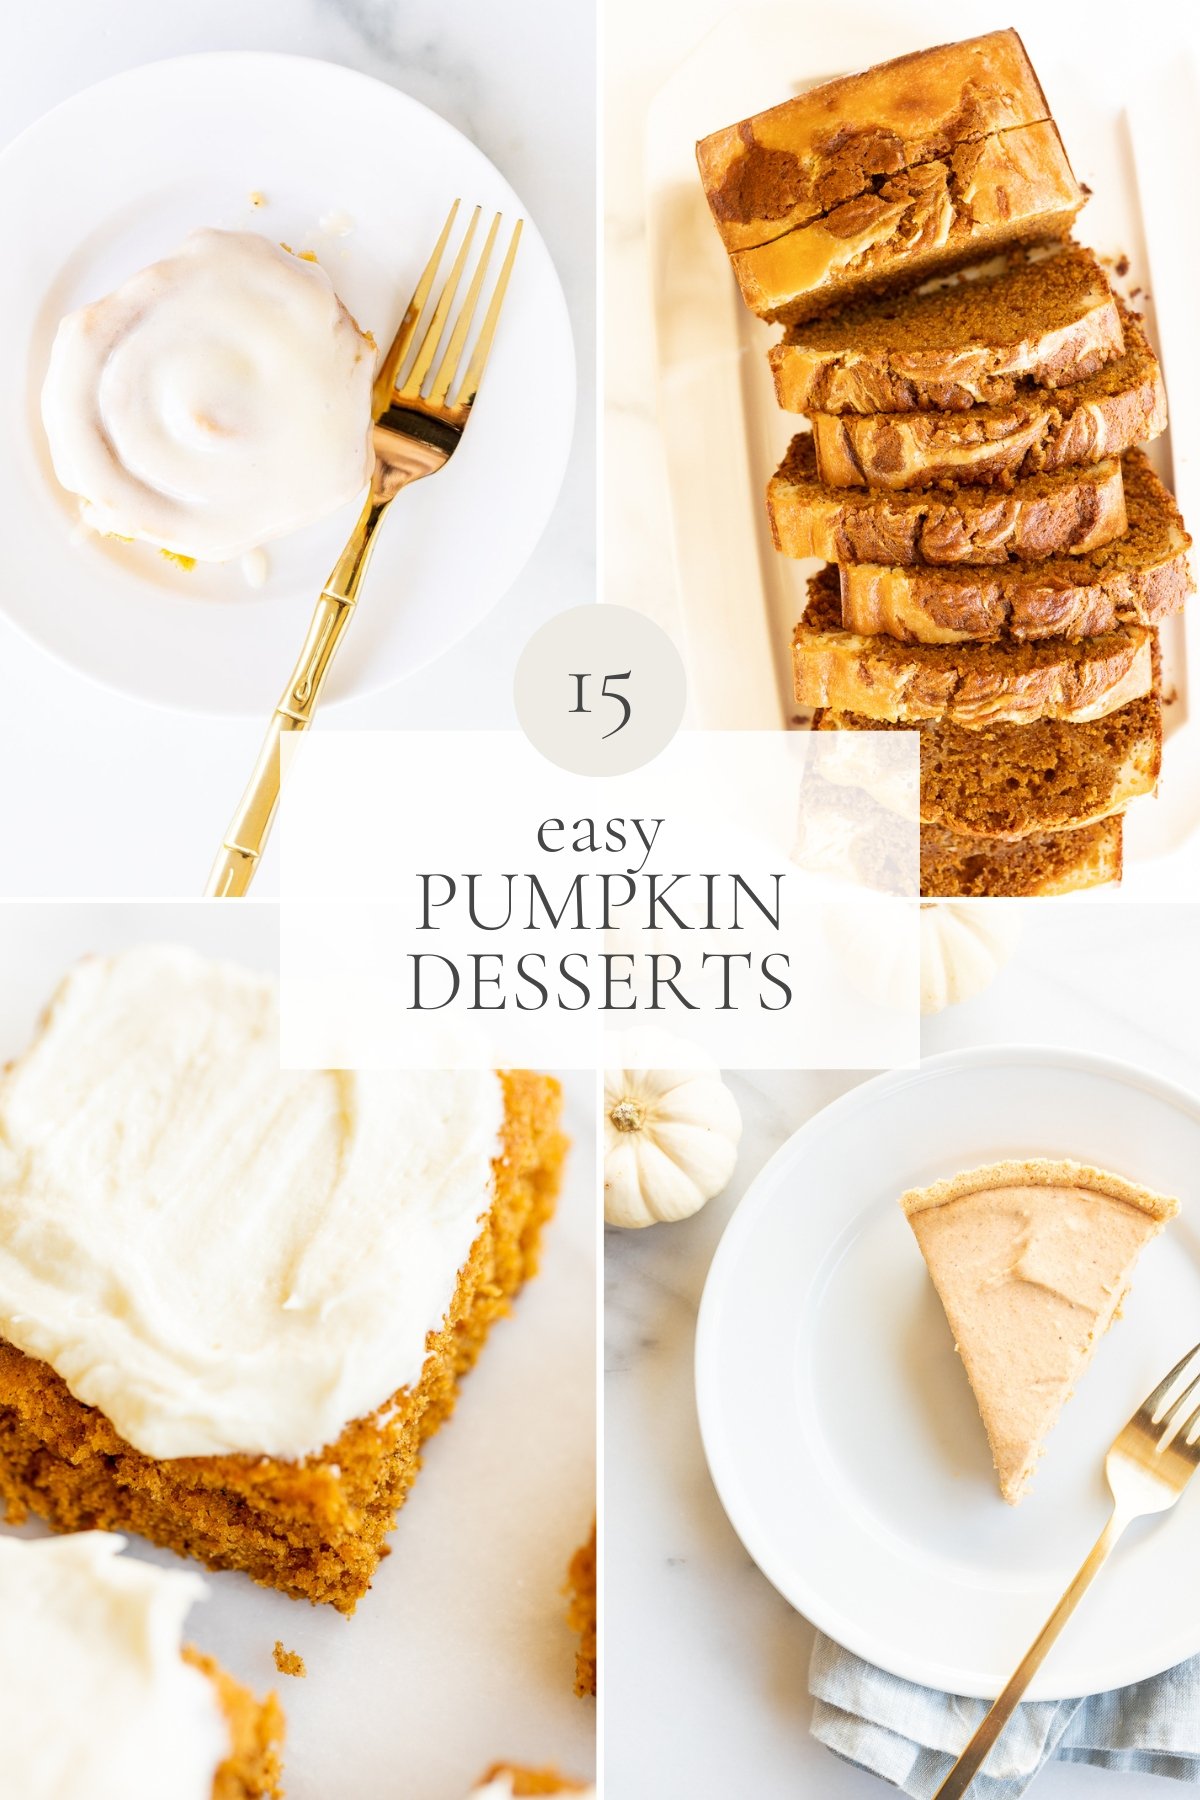 Explore a collection of 15 delectable and effortless pumpkin desserts that will satisfy your sweet tooth.